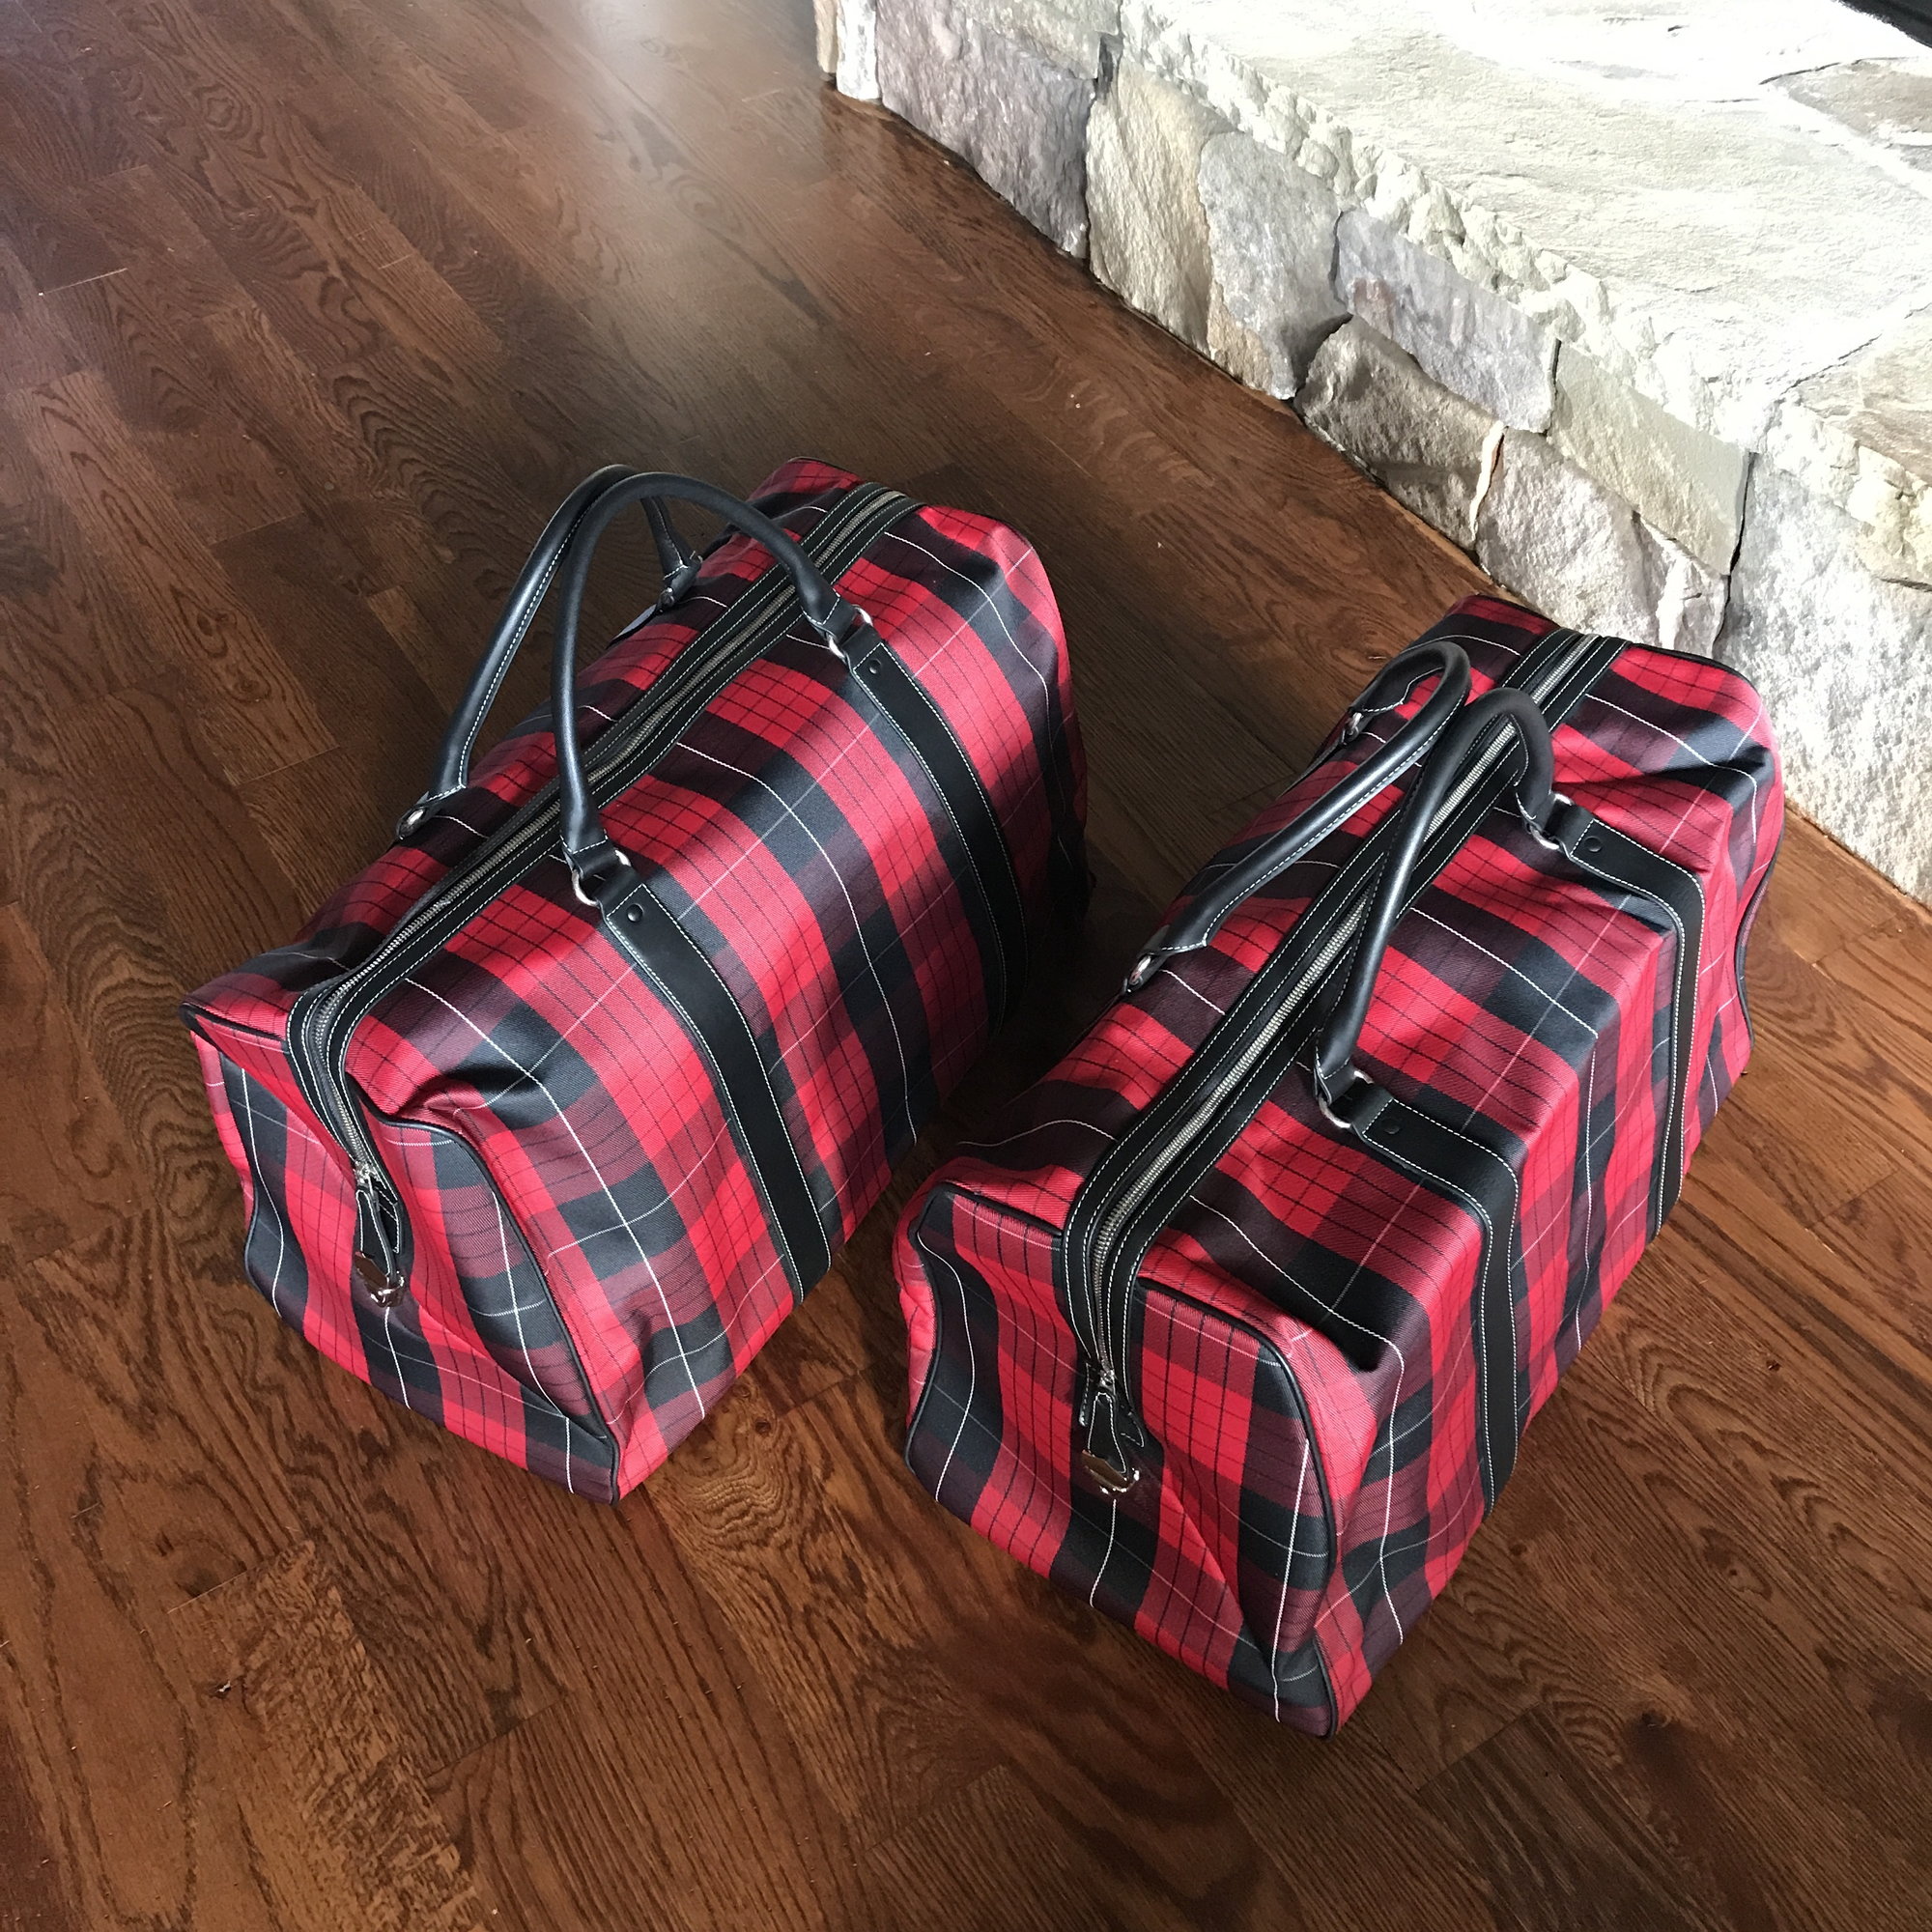 Miscellaneous - Two new PORSCHE 40 Jahre canvas duffles - New - Cary, NC 27518, United States